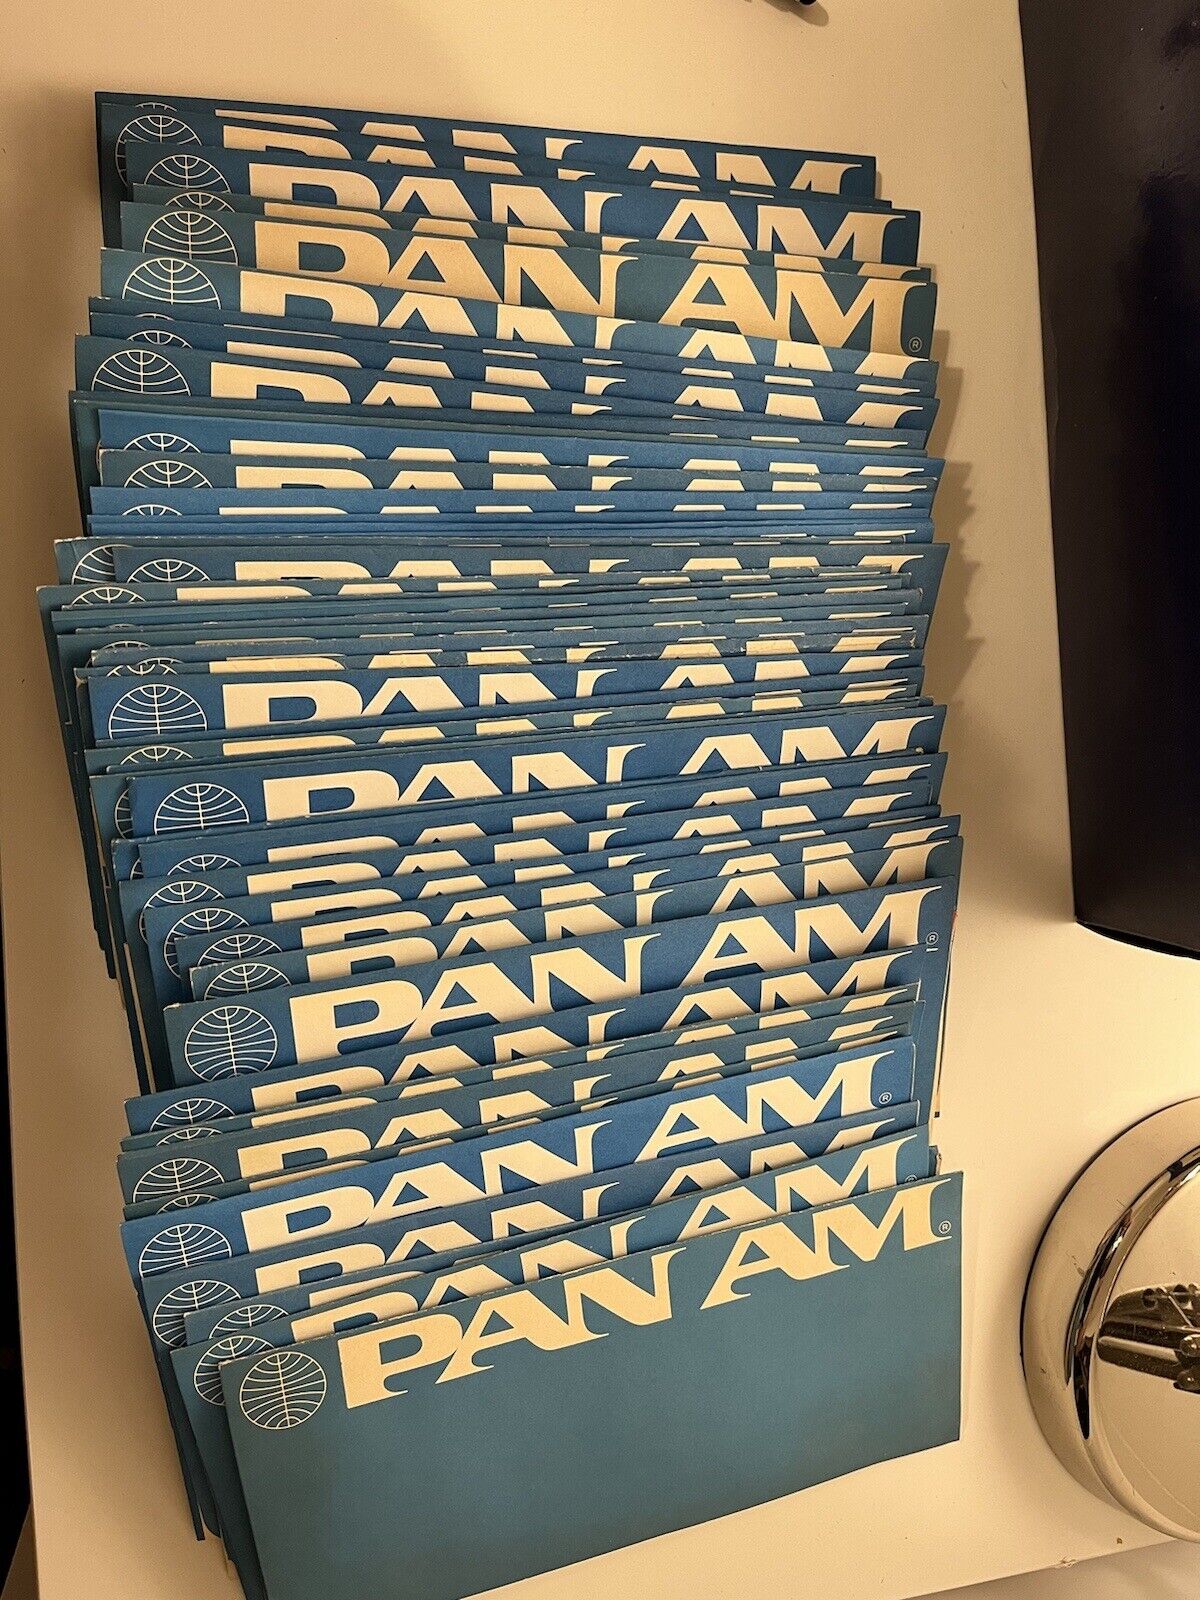 Vintage Pan Am Passenger Tickets - Former Employees - 1970s-1990 SINGLE TICKET